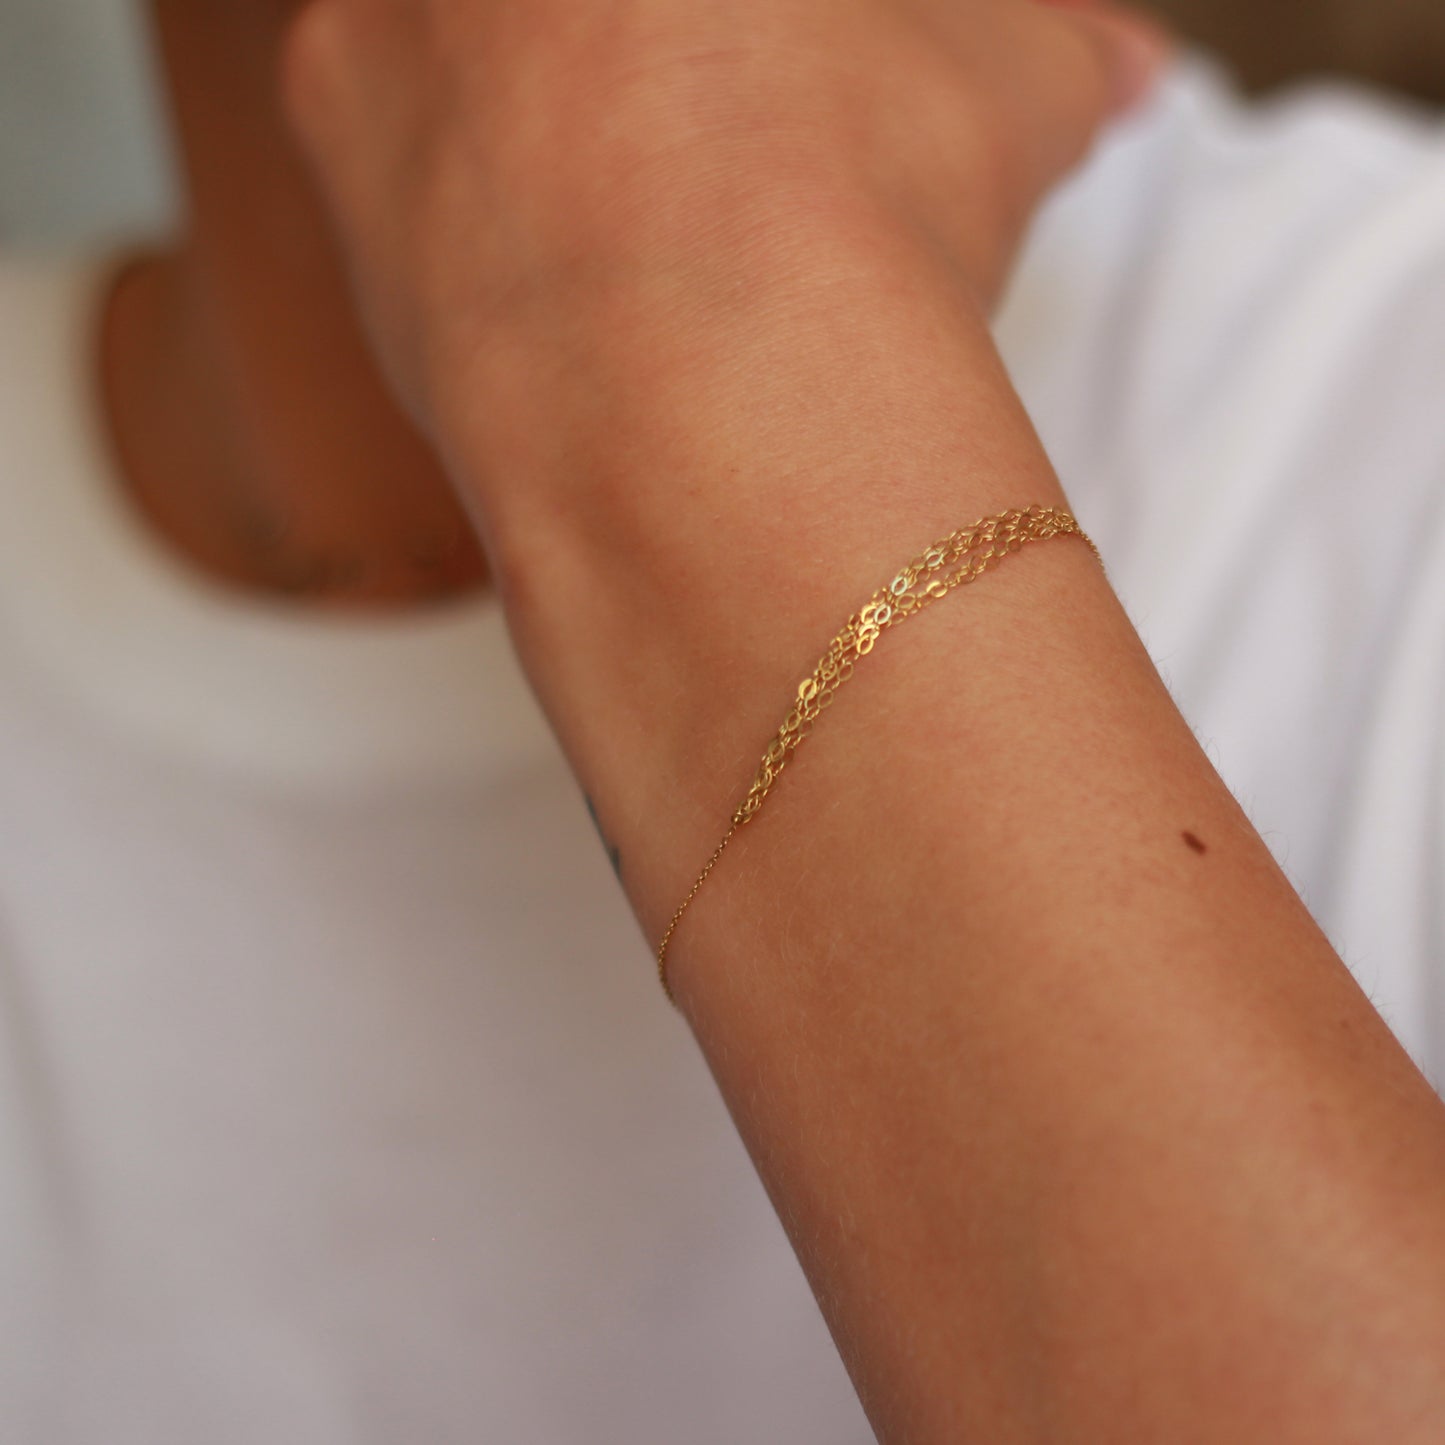 18ct yellow gold bracelet with layered chain section on model